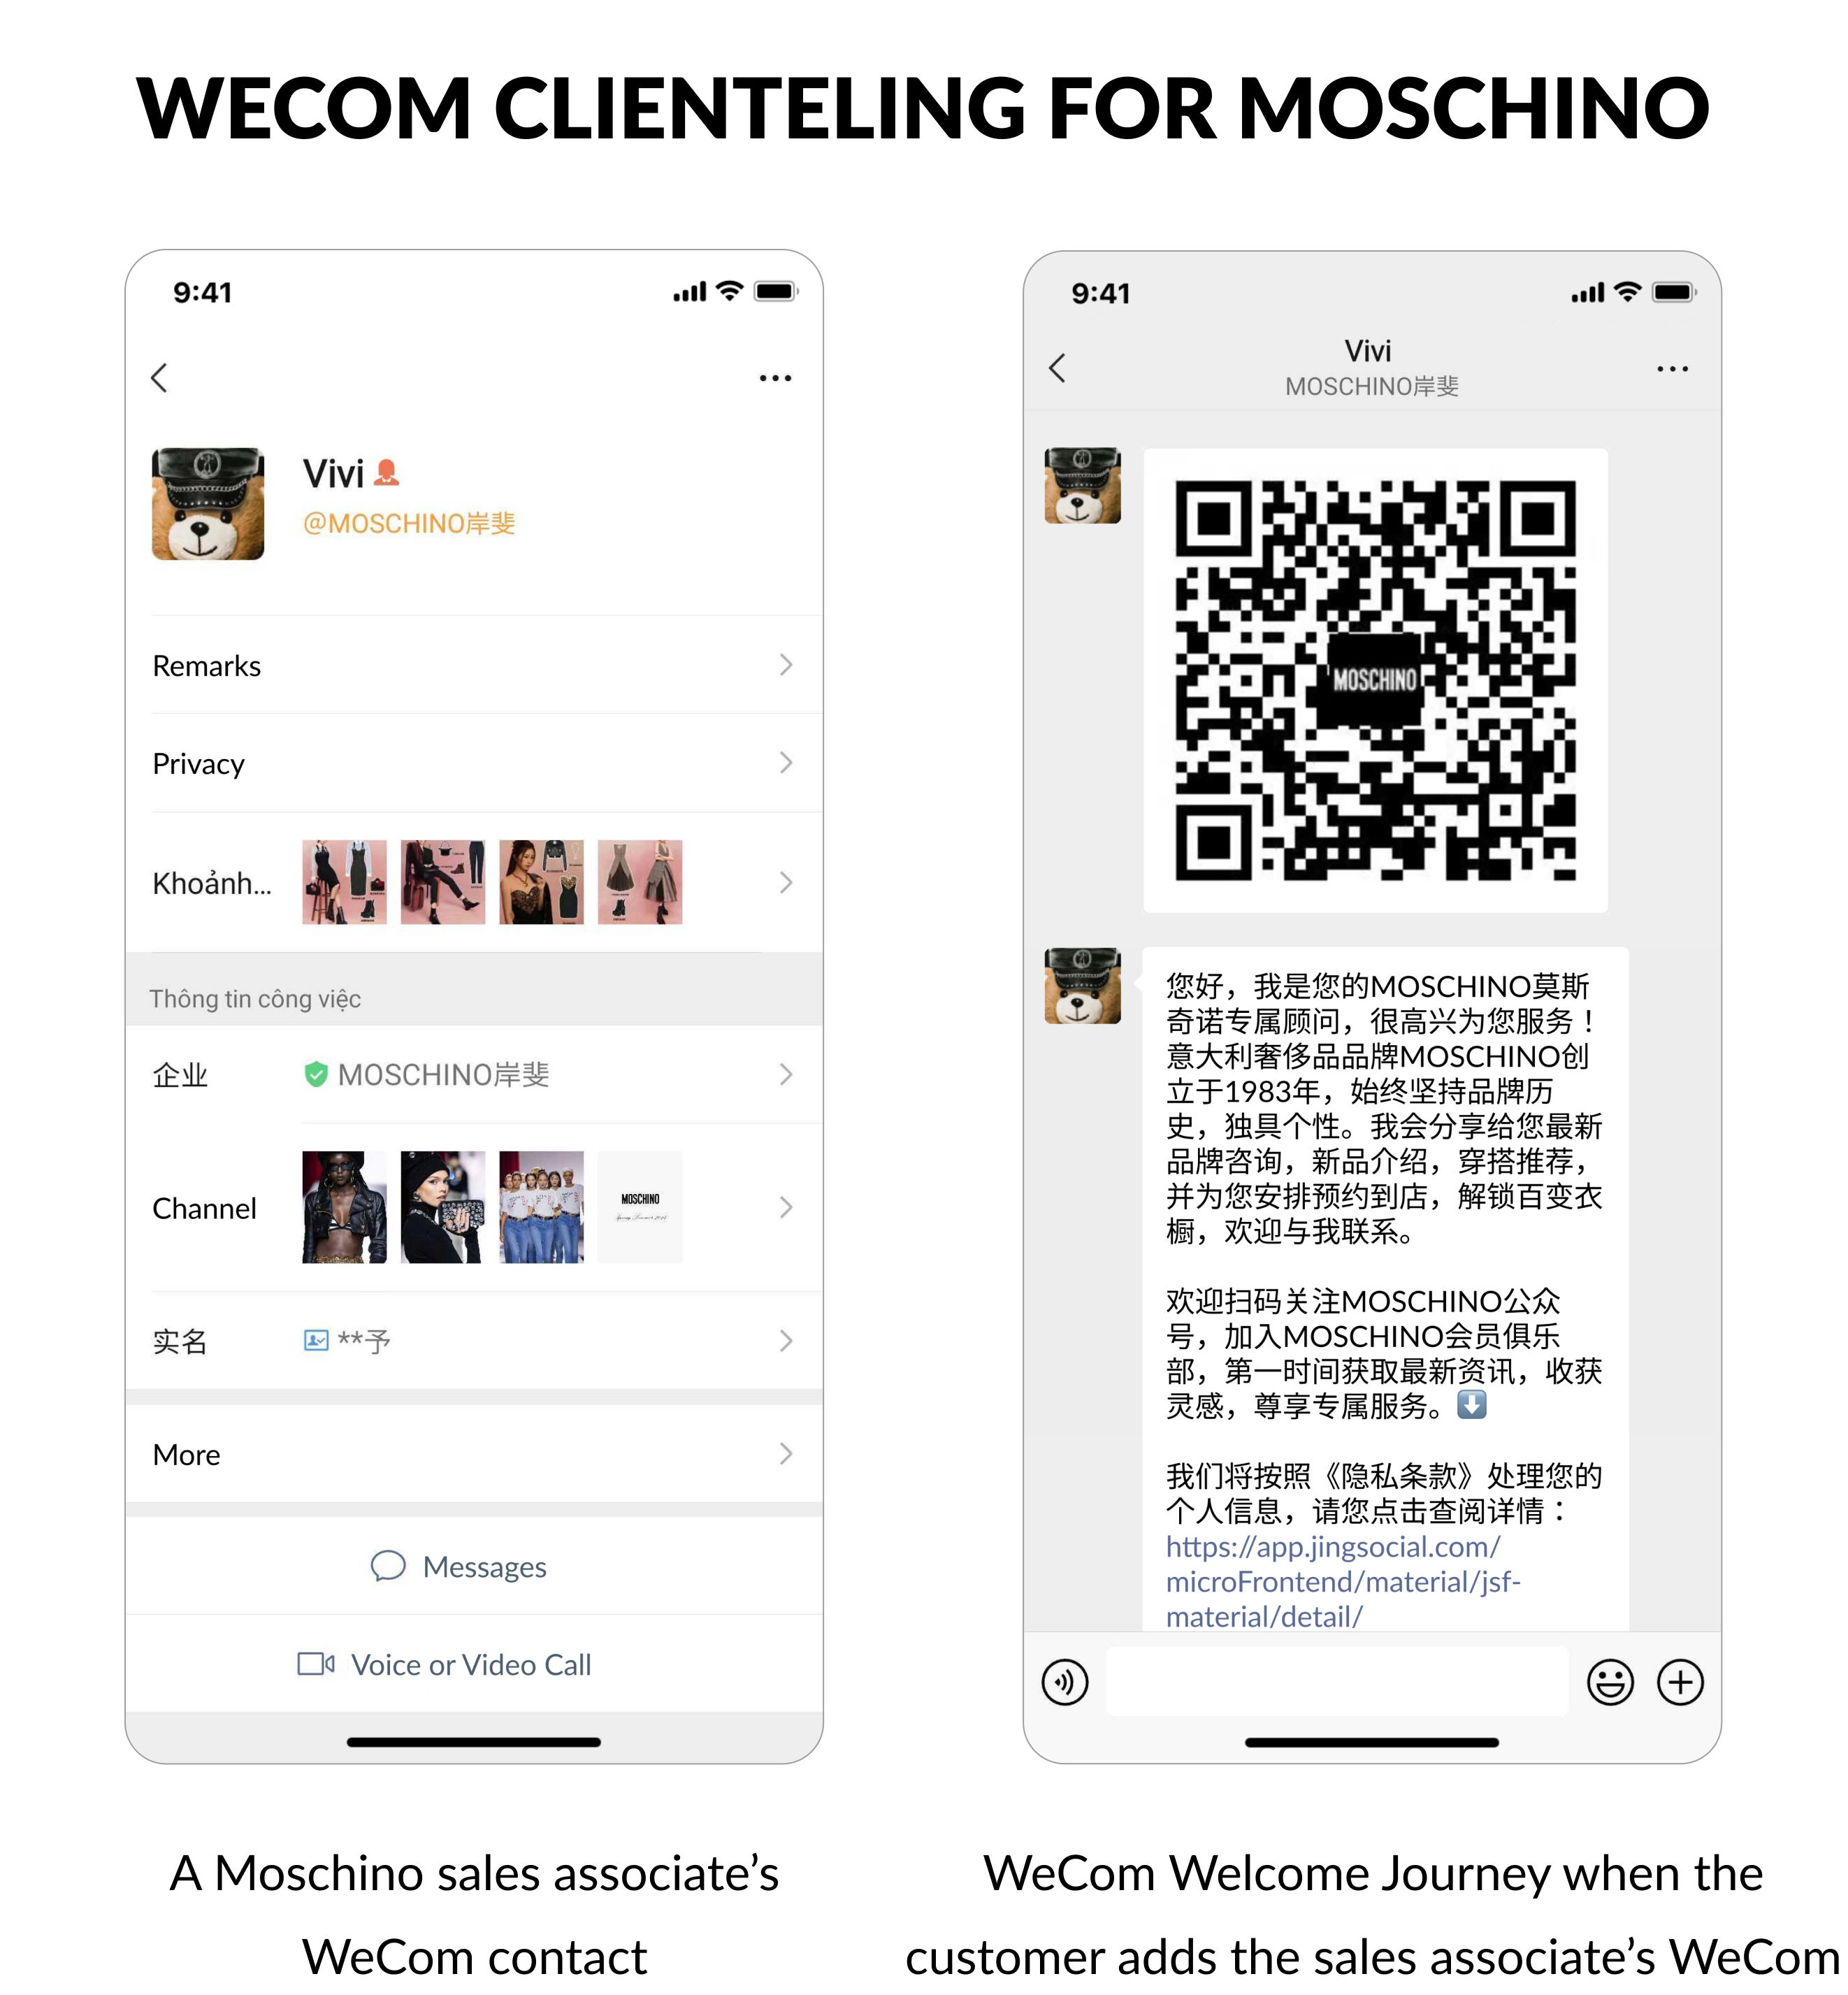 WeCom (WeChat Work) clienteling strategy and execution for Moschino